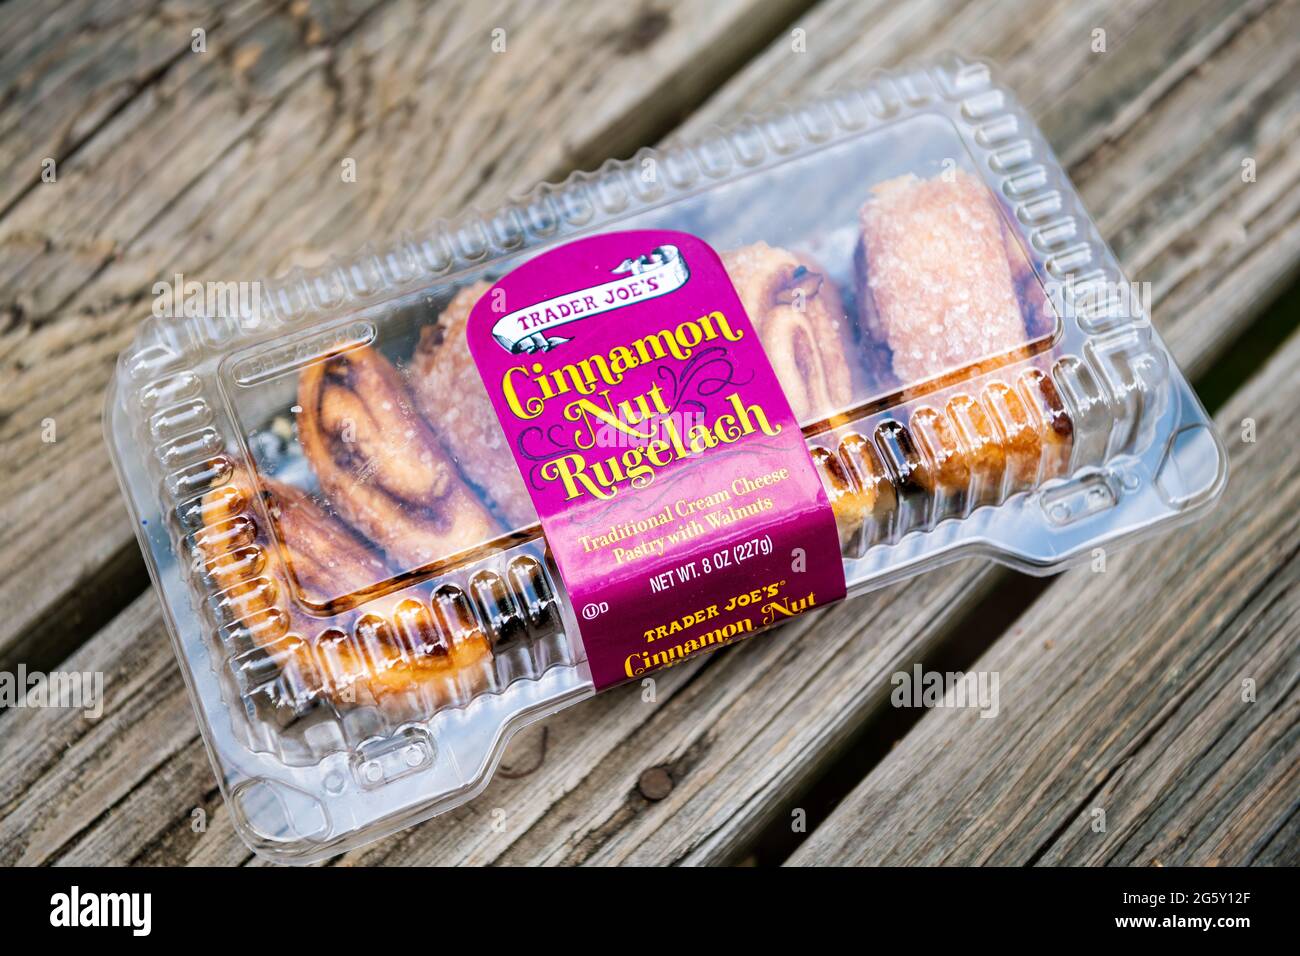 Herndon, USA - May 23, 2021: Sign label and product closeup of cinnamon nut Rugelach pastry Jewish dessert storebought at Trader Joe's Stock Photo